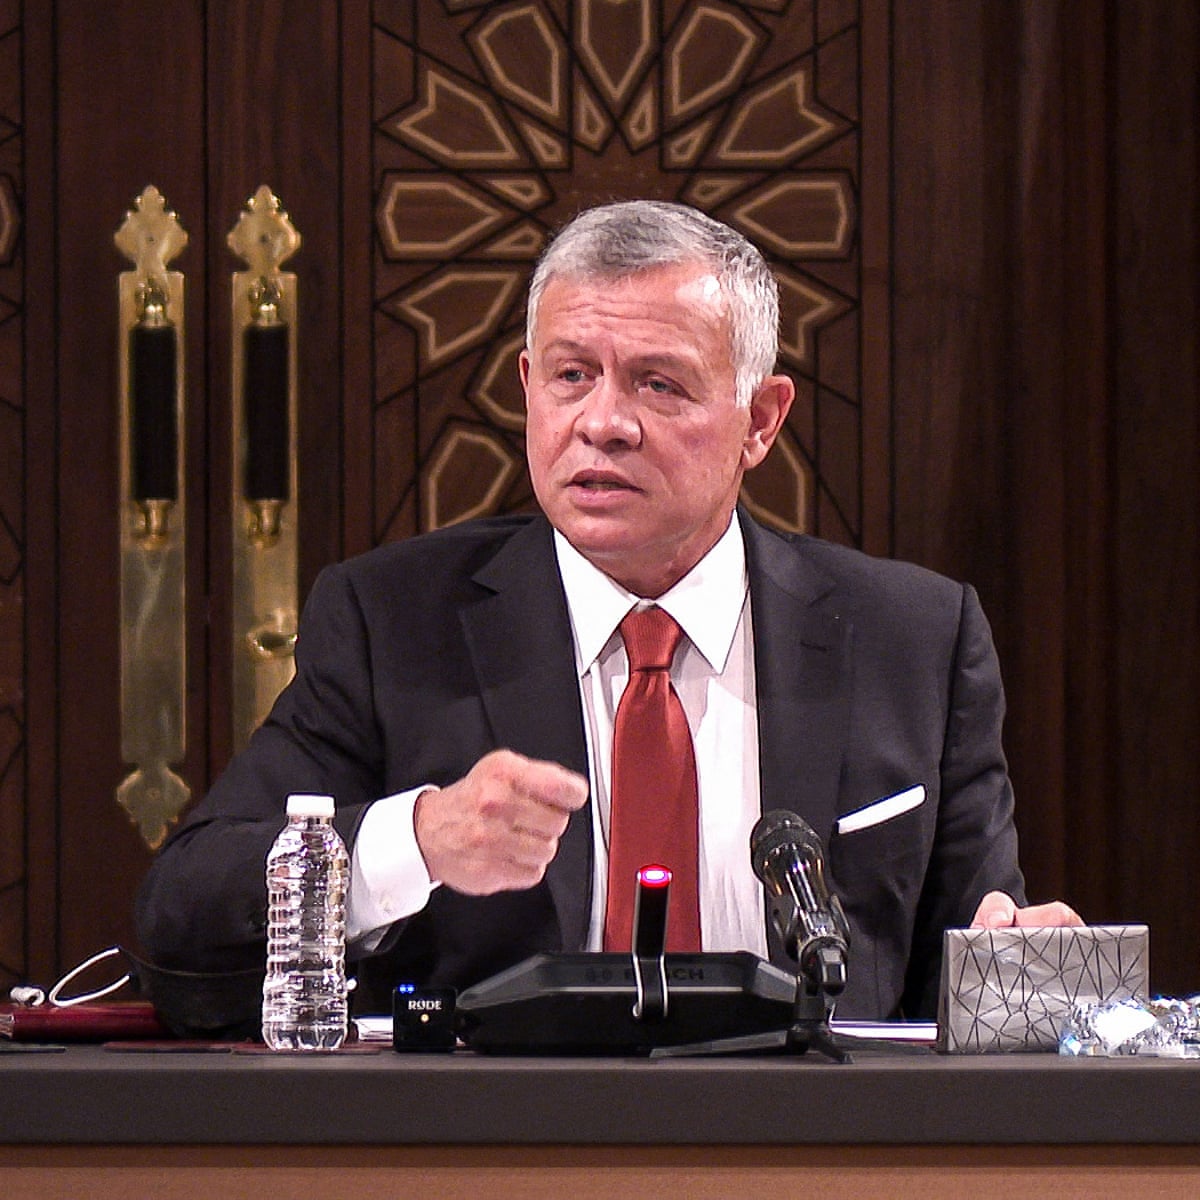 King urges reaching universal health coverage within specific time frame in Jordan